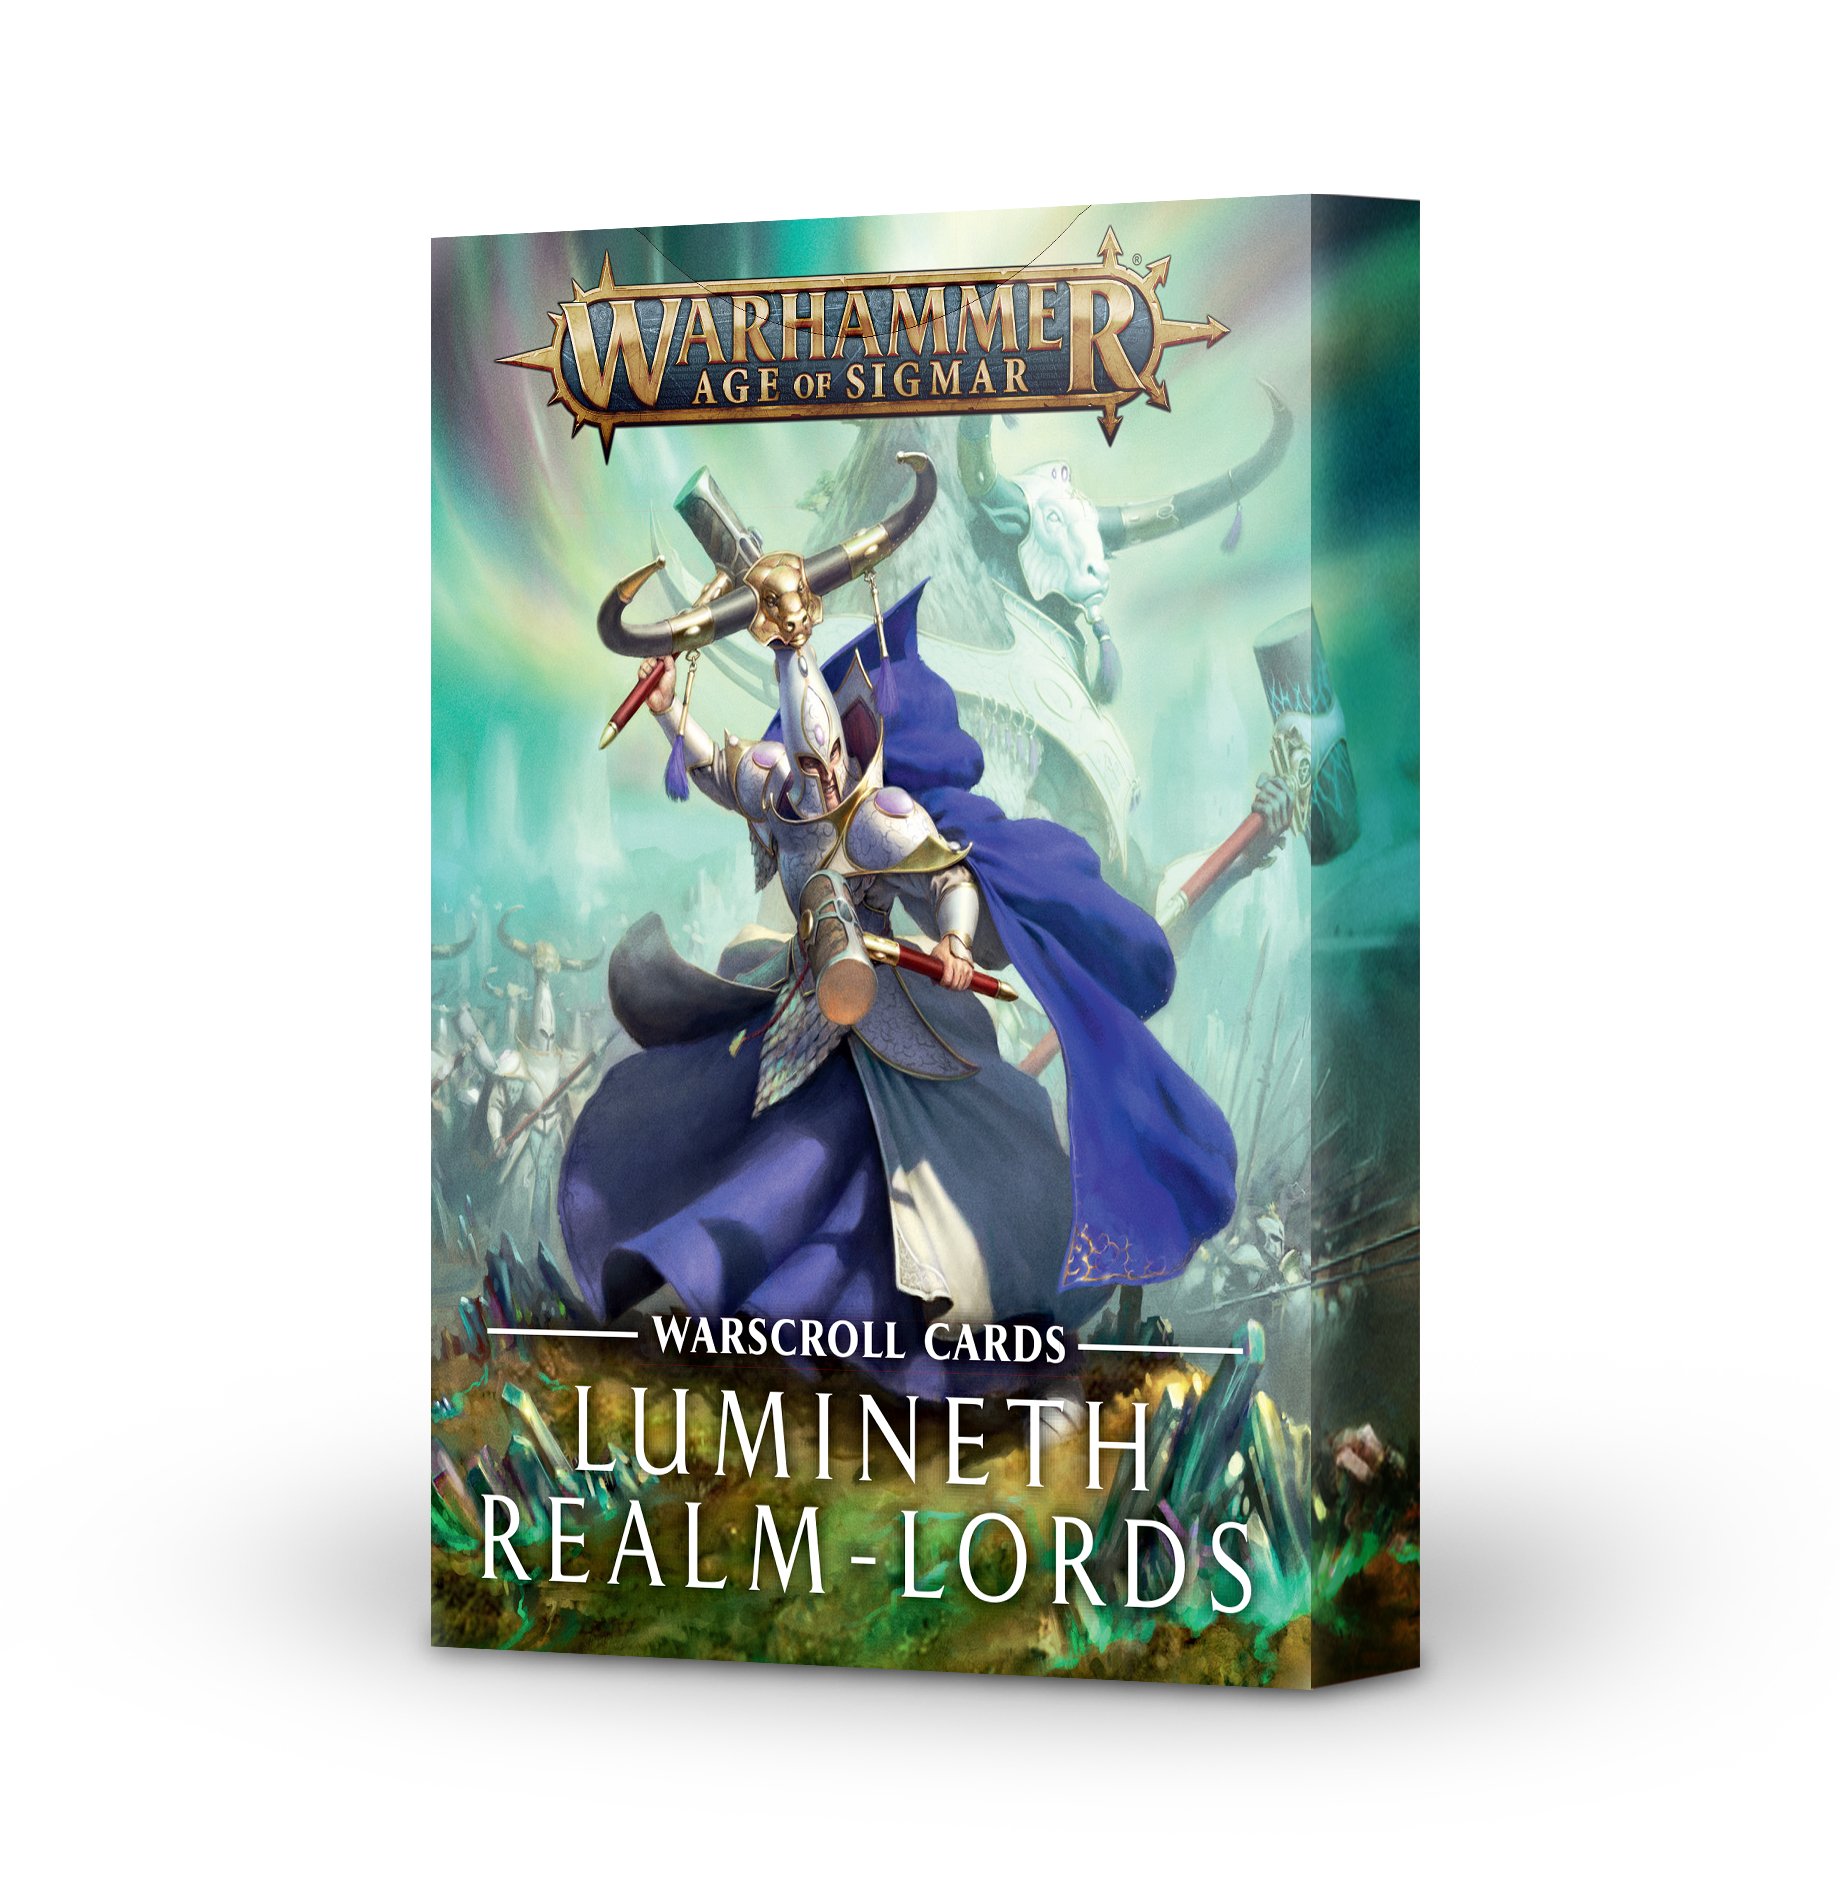 Warhammer Age of Sigmar: Warscroll Cards: Lumineth Realm-lords (First Wave 2020) [SALE] 